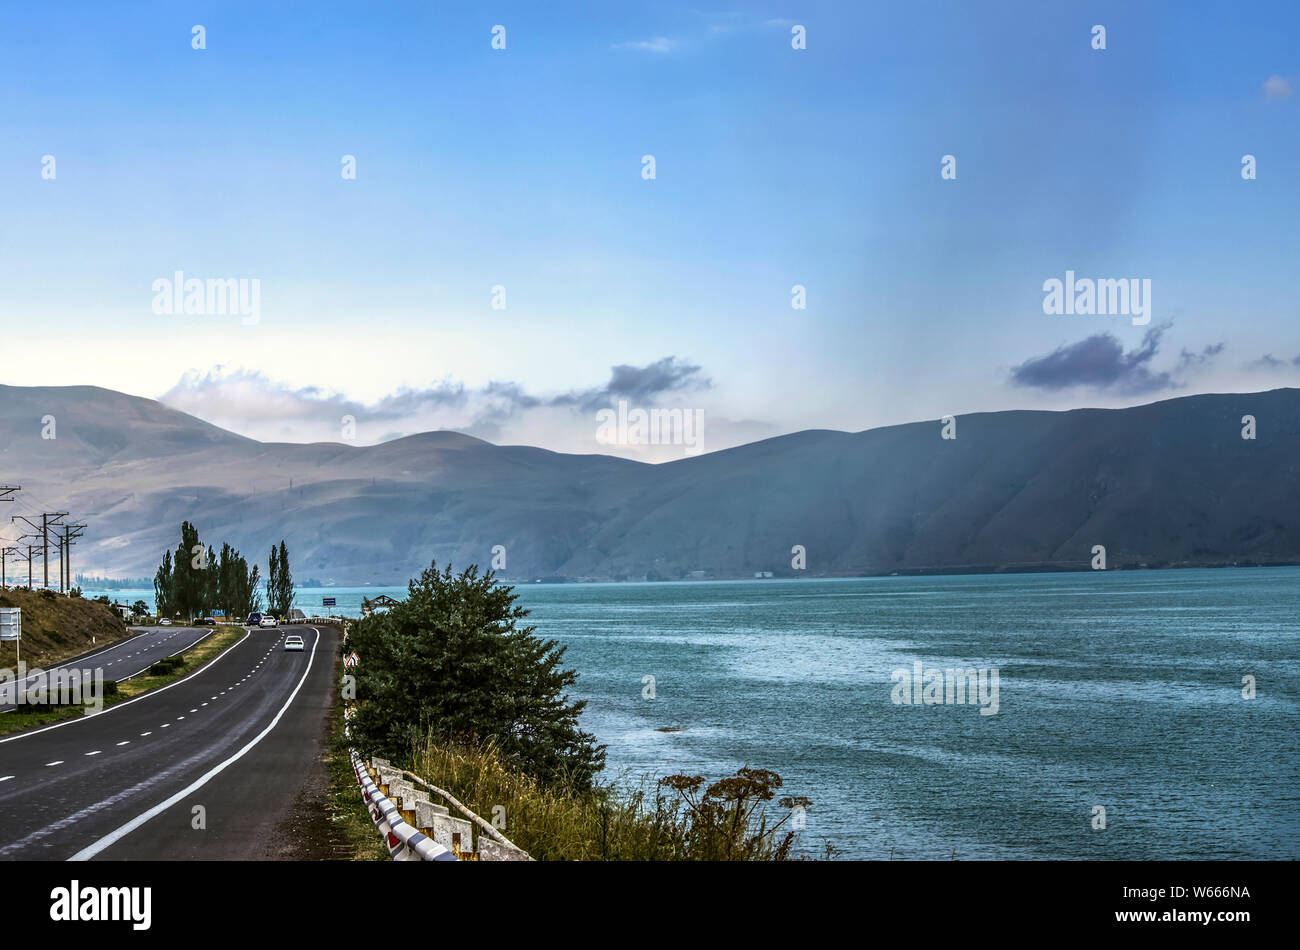 A sharp turn on the road along the coast of the high-mountain lake Sevan, surrounded by the mountains of the Gegham range Stock Photo